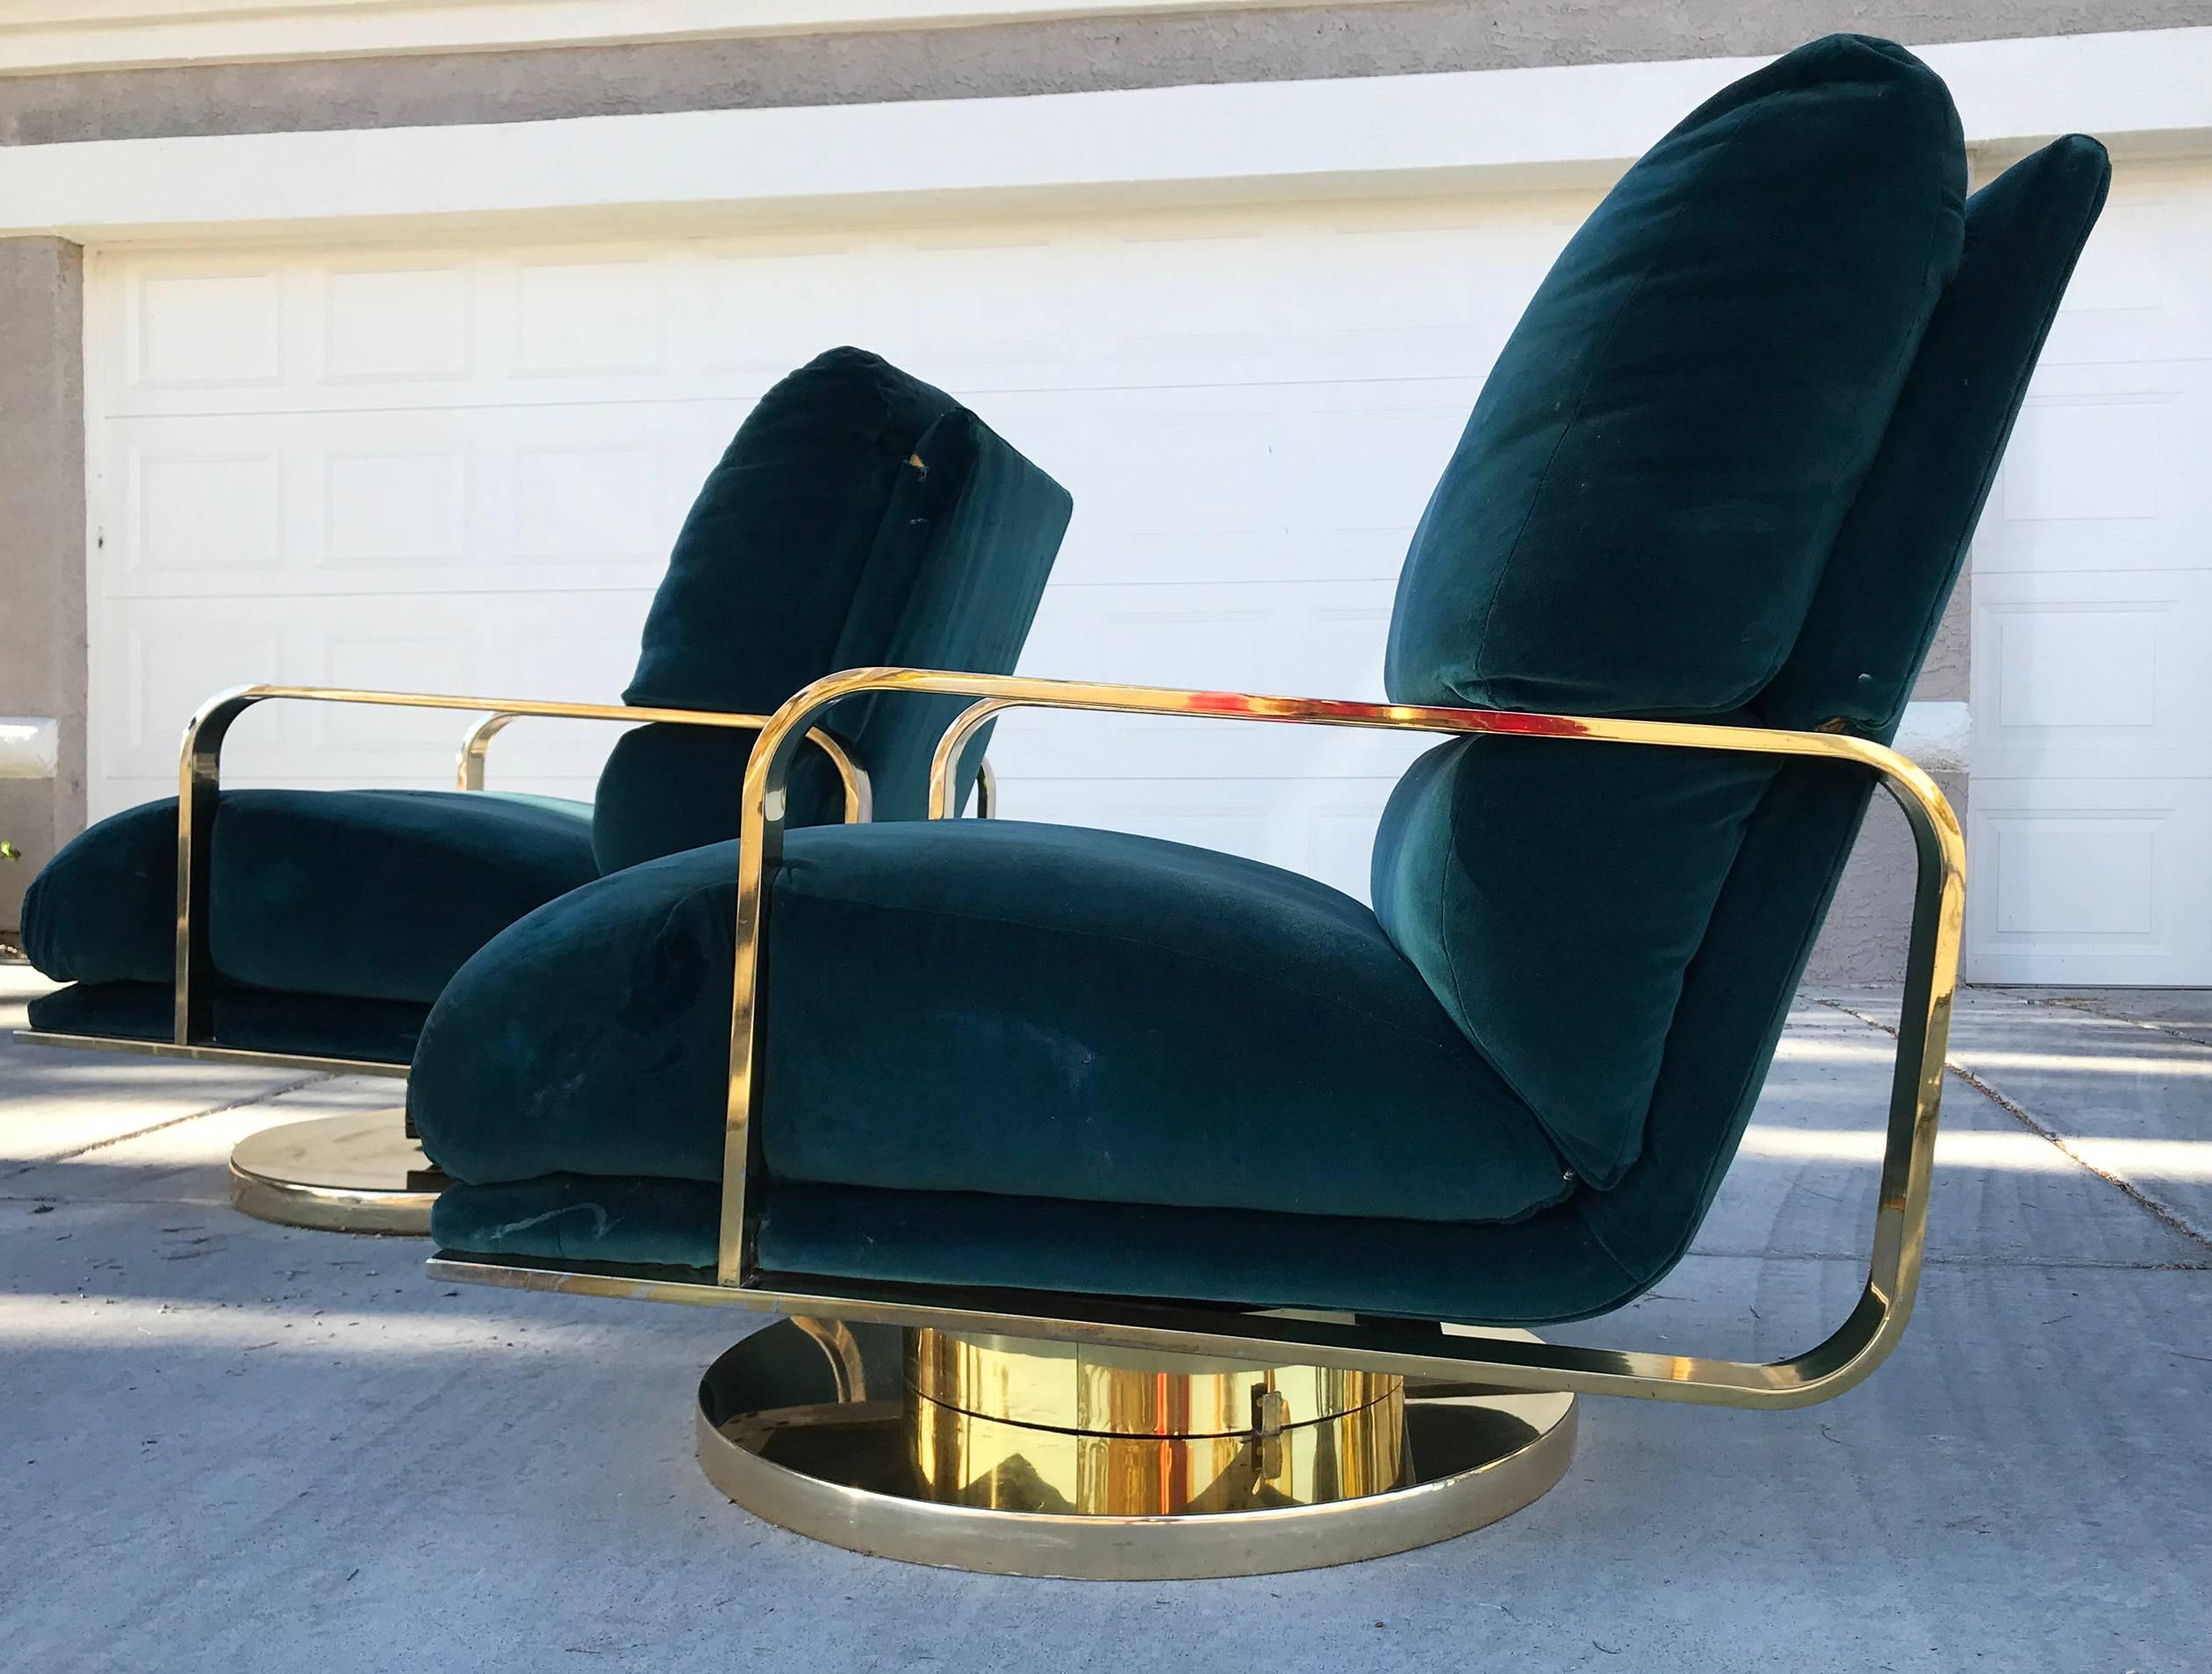 Right now we have an incredible find a pair of Milo Baughman brass base, swivel and rocking lounge chairs. These chairs were created alongside their matching chaise longue counterparts (with same base) and are incredibly hard to find. This set is in